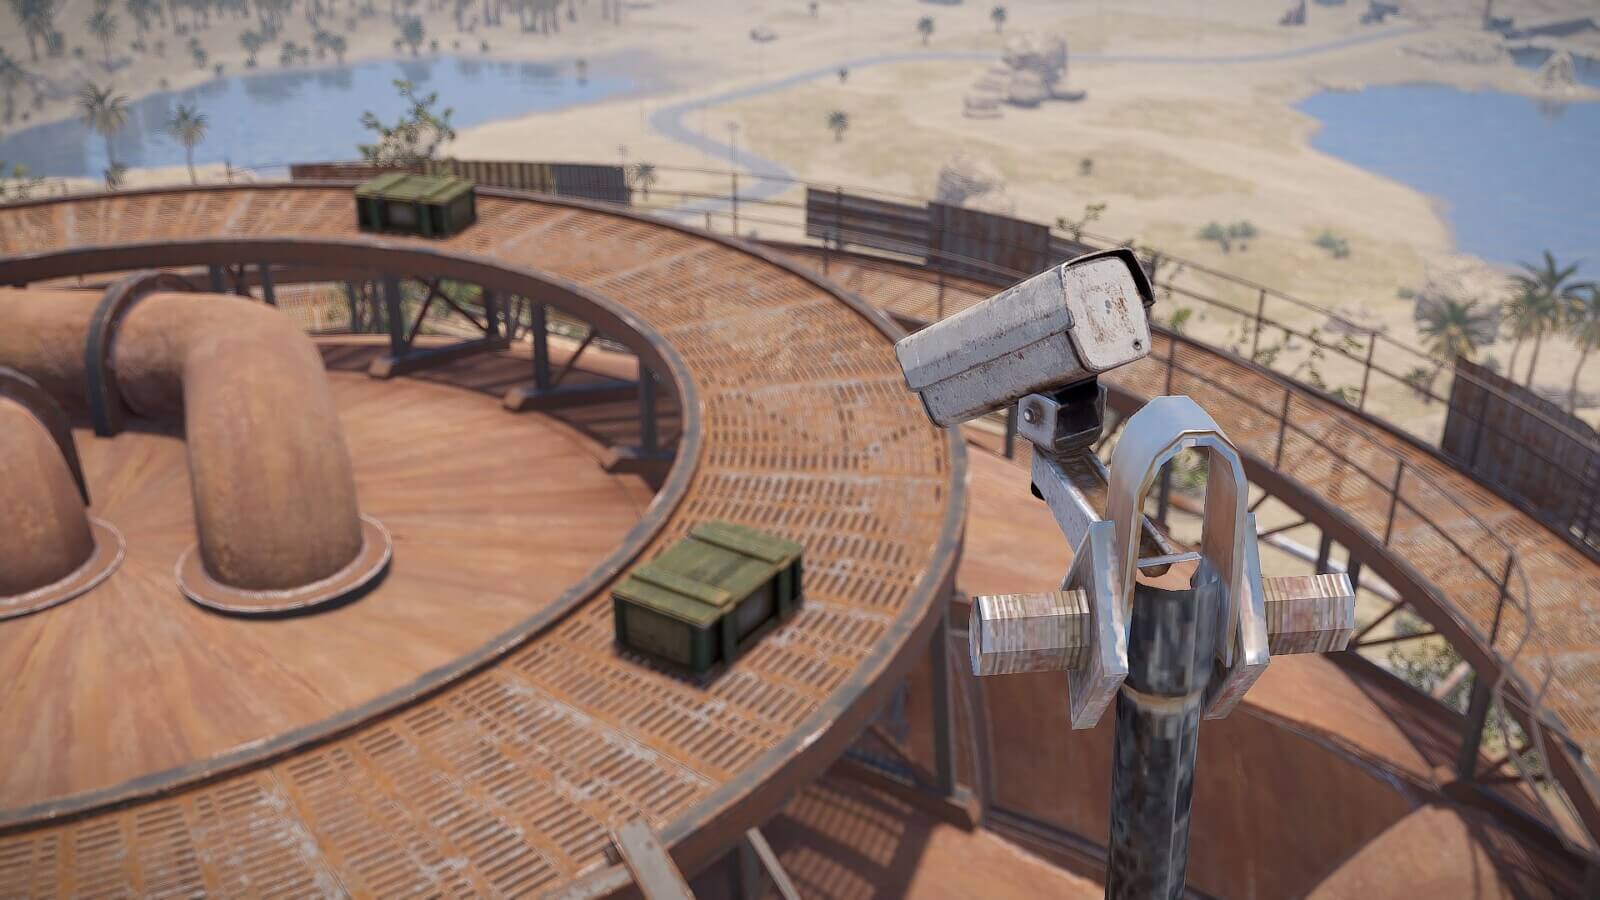 The CCTV camera located at the very top of the Sphere Tank Rust monument.